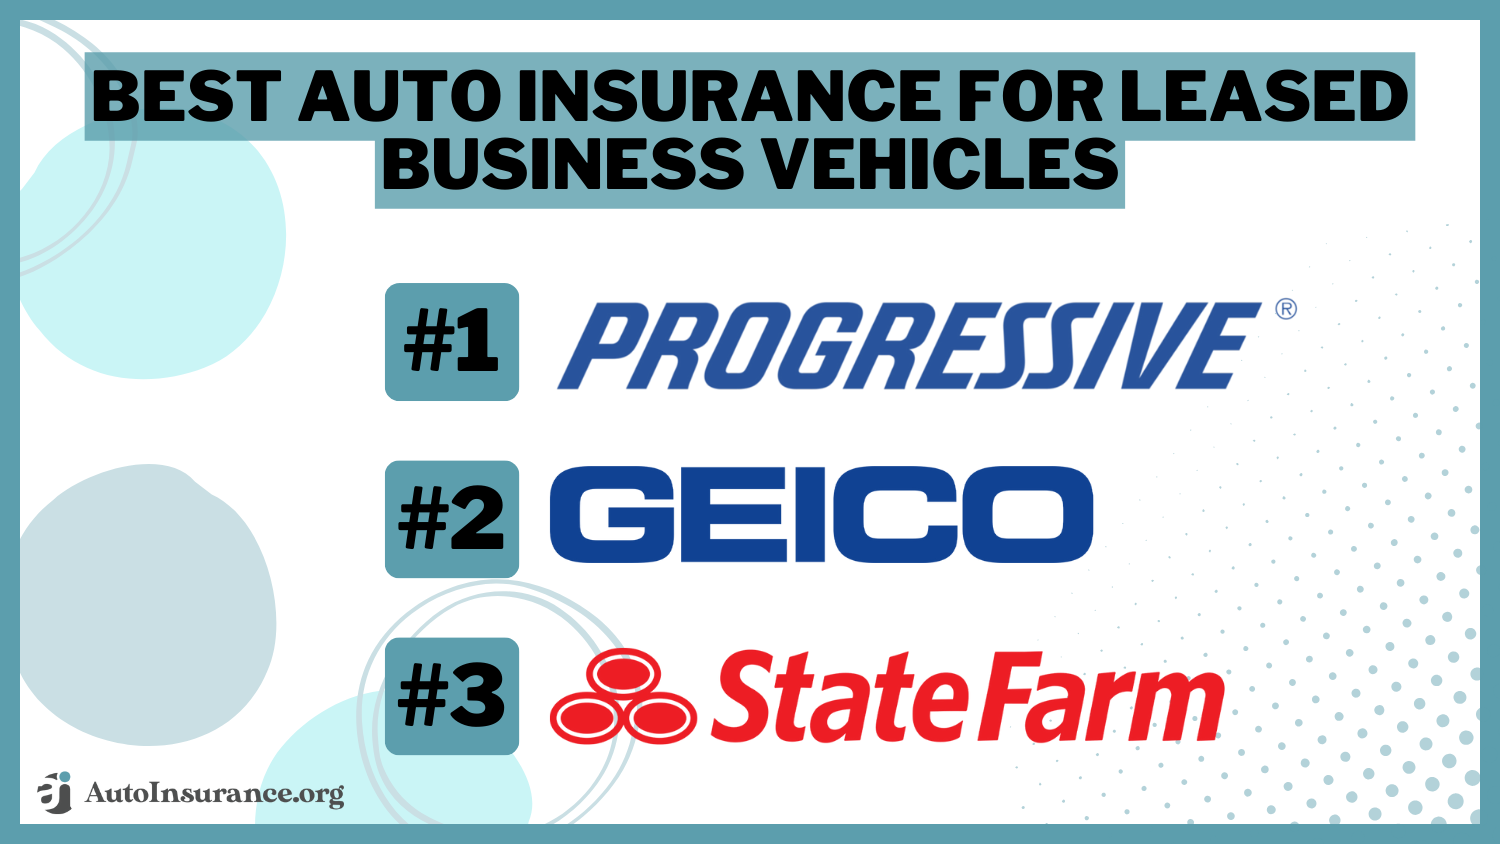 Best Auto Insurance for Leased Business Vehicles: Progressive, Geico, State Farm